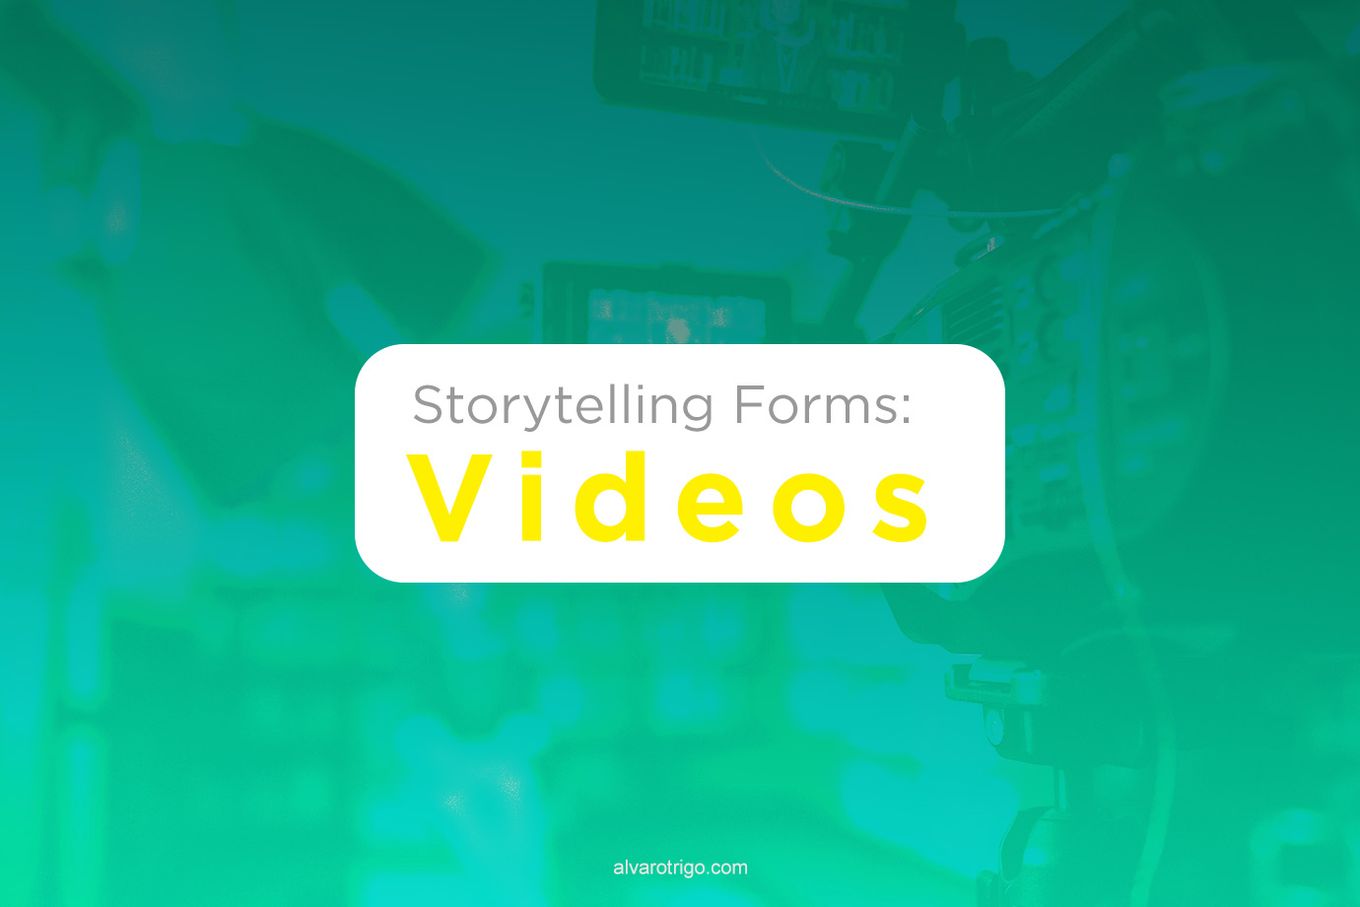 Storytelling Forms - Videos